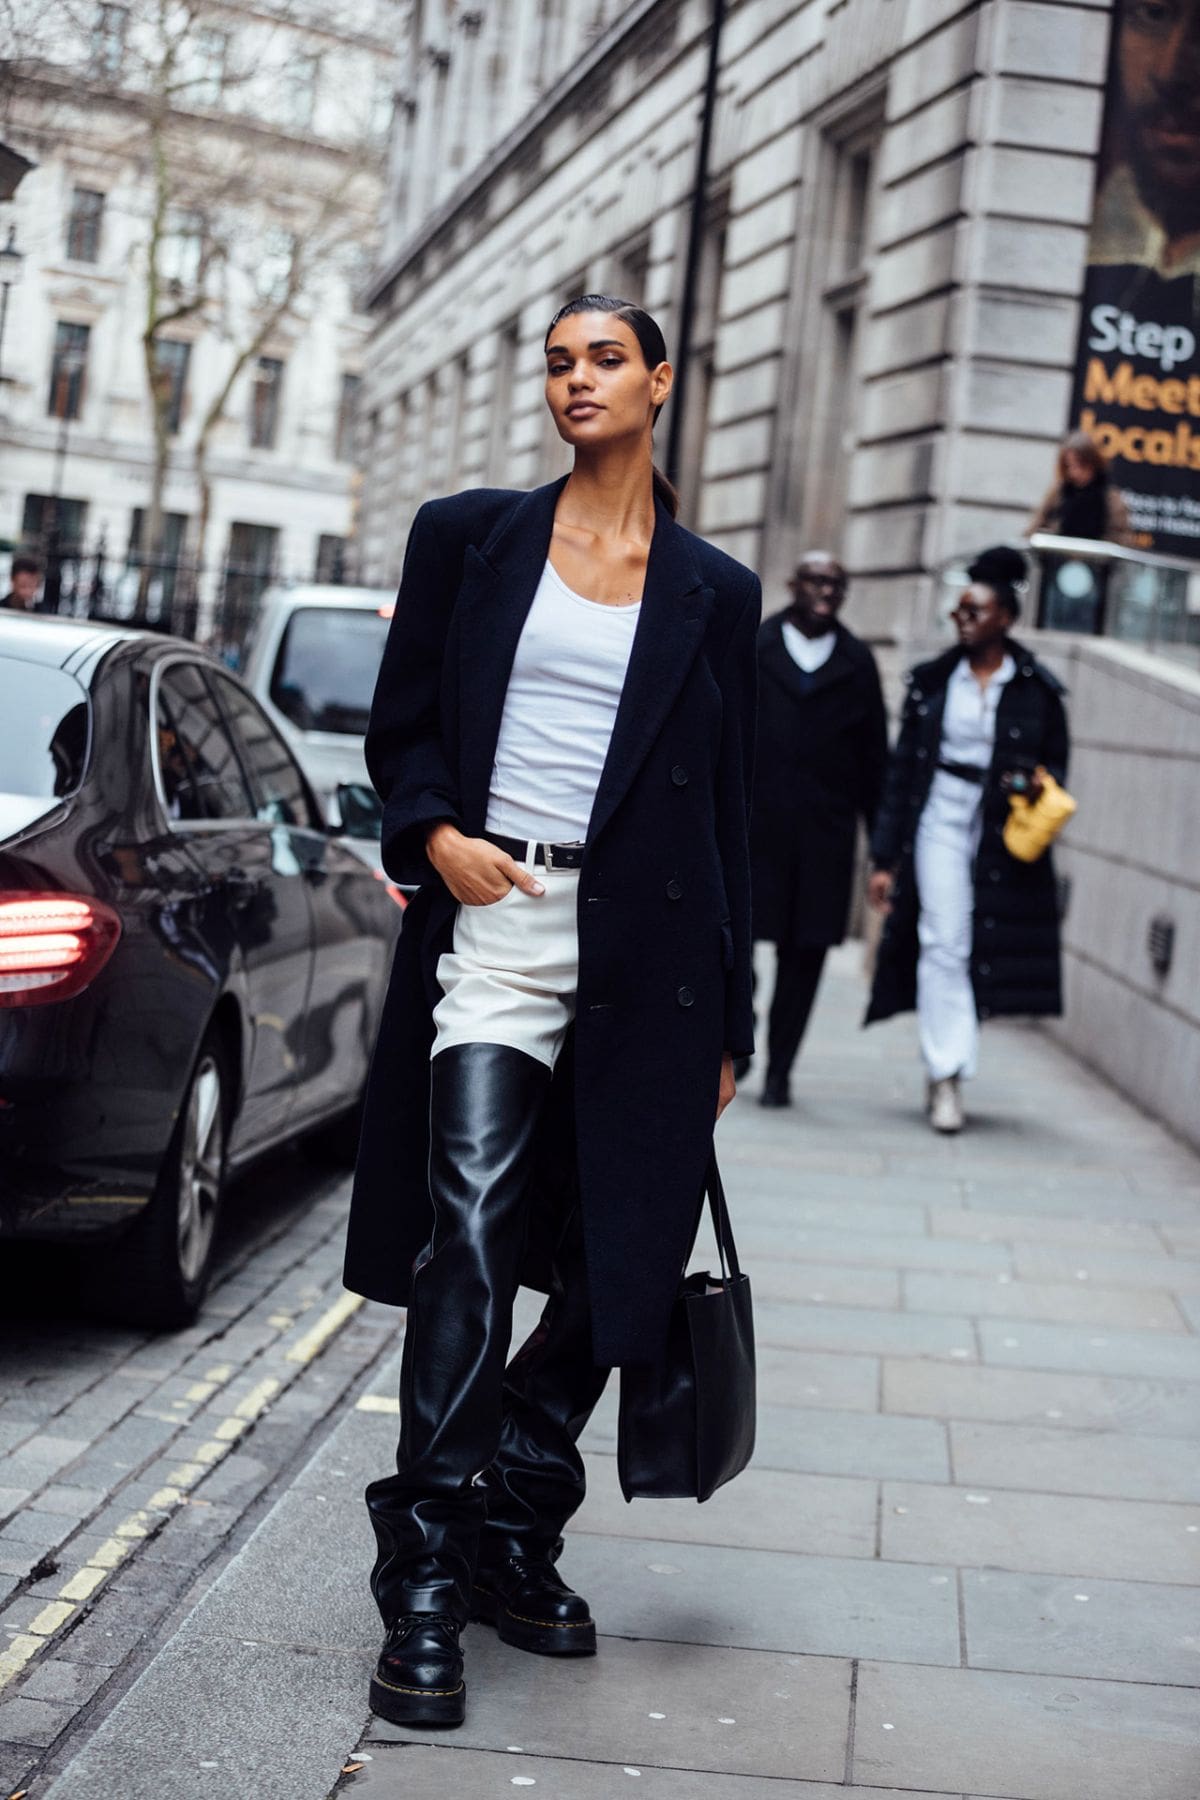 Barbara Valente Street Style at London Fashion Week Fall-Winter 2020 by Melodie Jeng